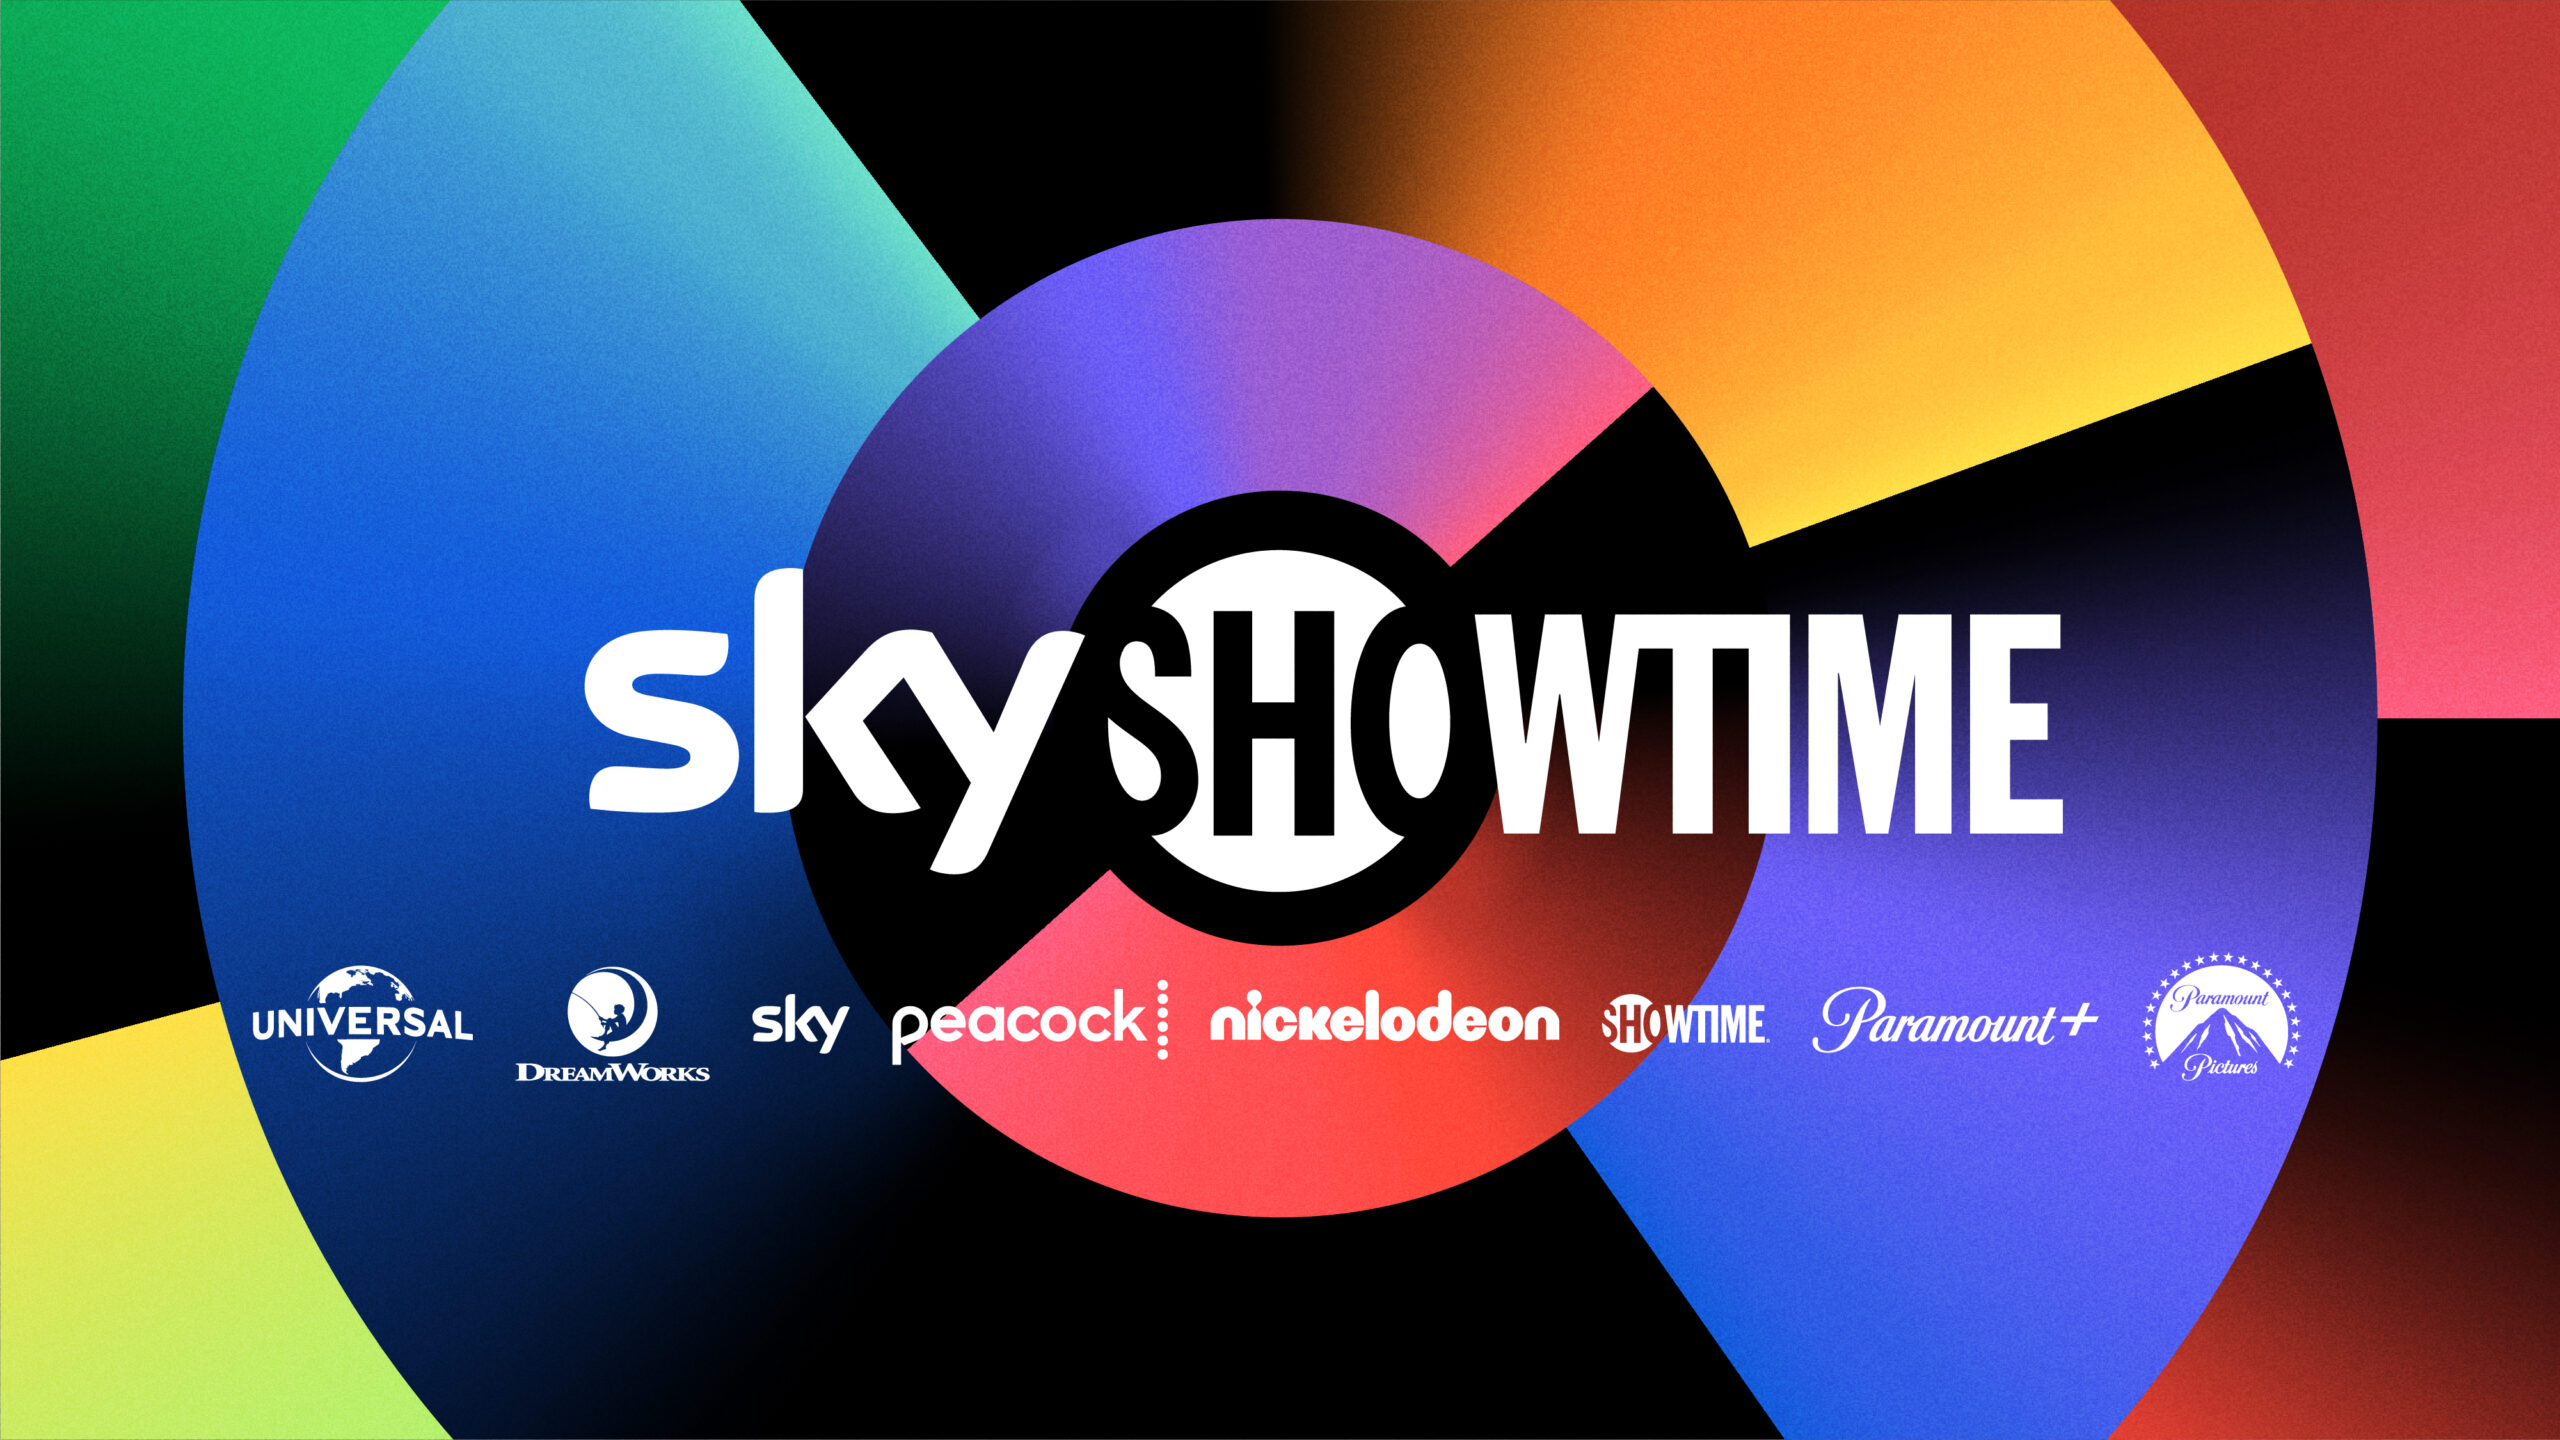 The image shows a colorful graphic with the logo for "SkyShowtime" in the center against a background of segmented colors. Surrounding the central logo are various media brand logos: Universal, DreamWorks, Sky, Peacock, Nickelodeon, Showtime, Paramount+, and Paramount Pictures.